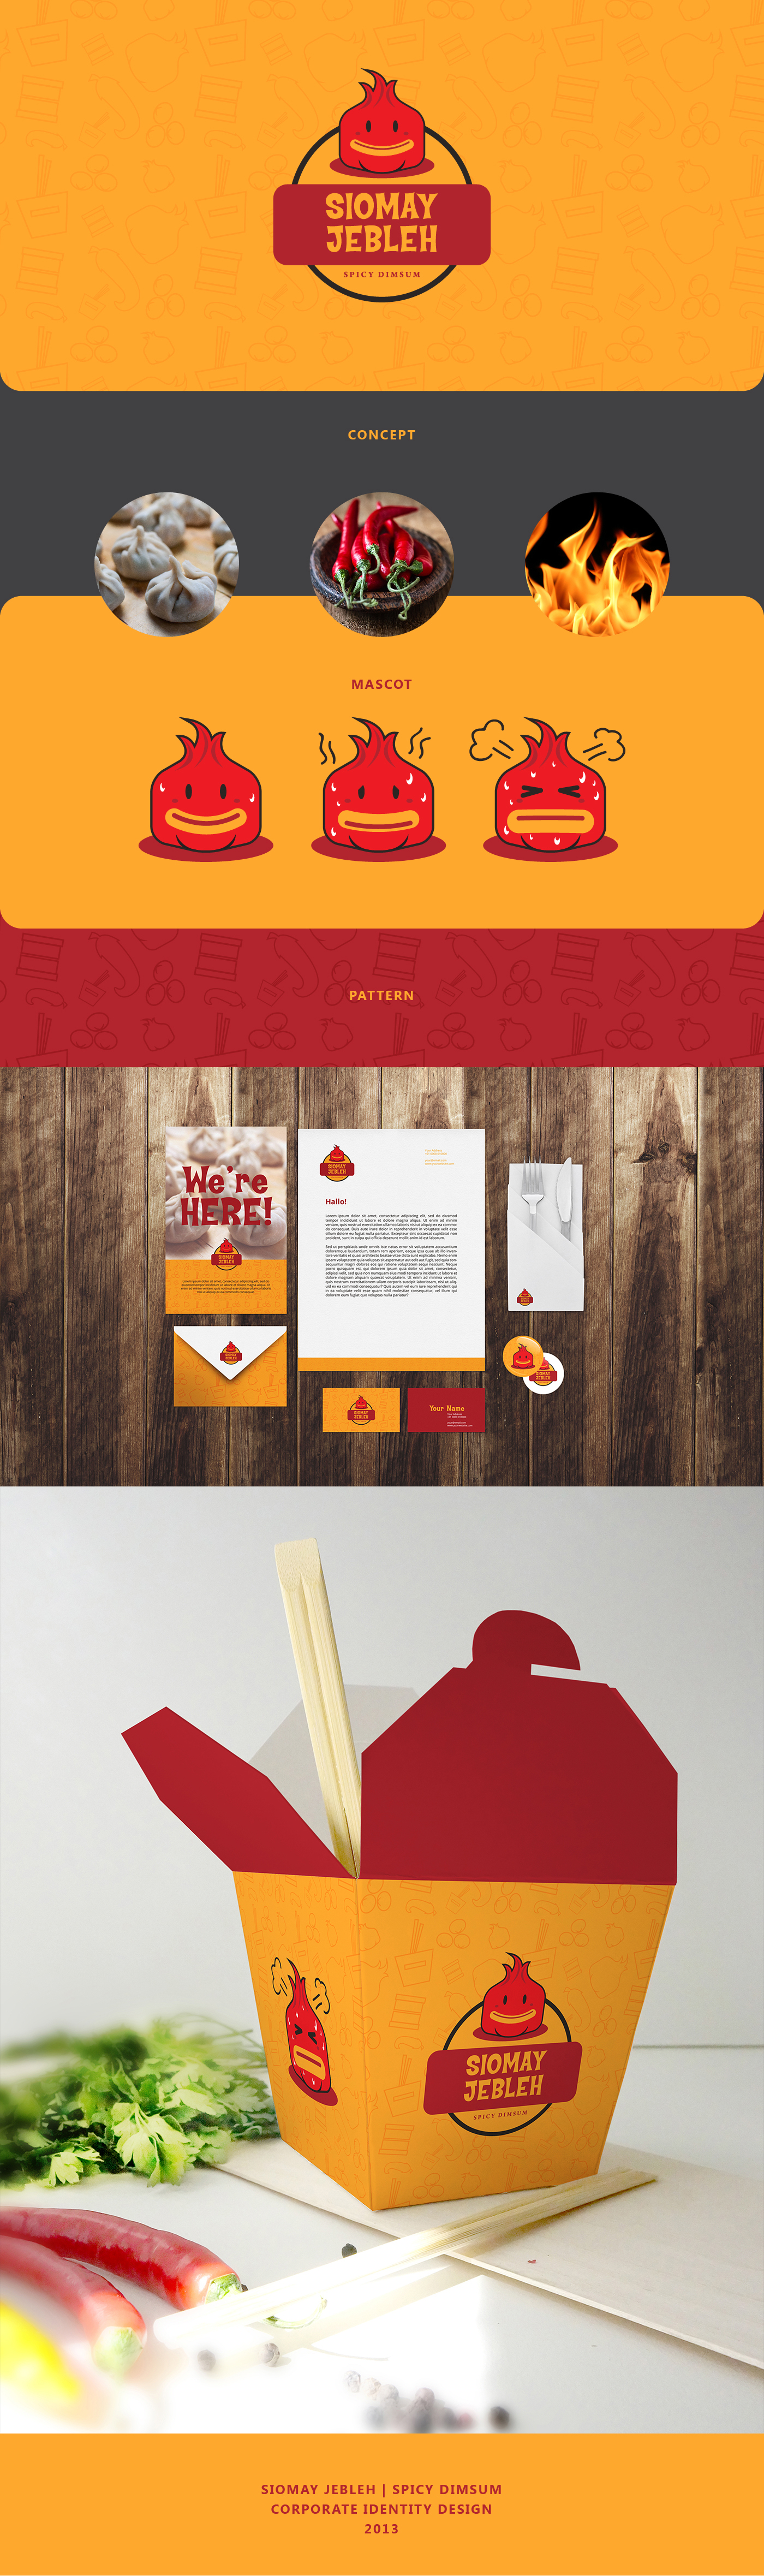 dimsum Food  brand brand identity visual identity Stationery spicy red Hot spicy food Mascot Illustrative cute